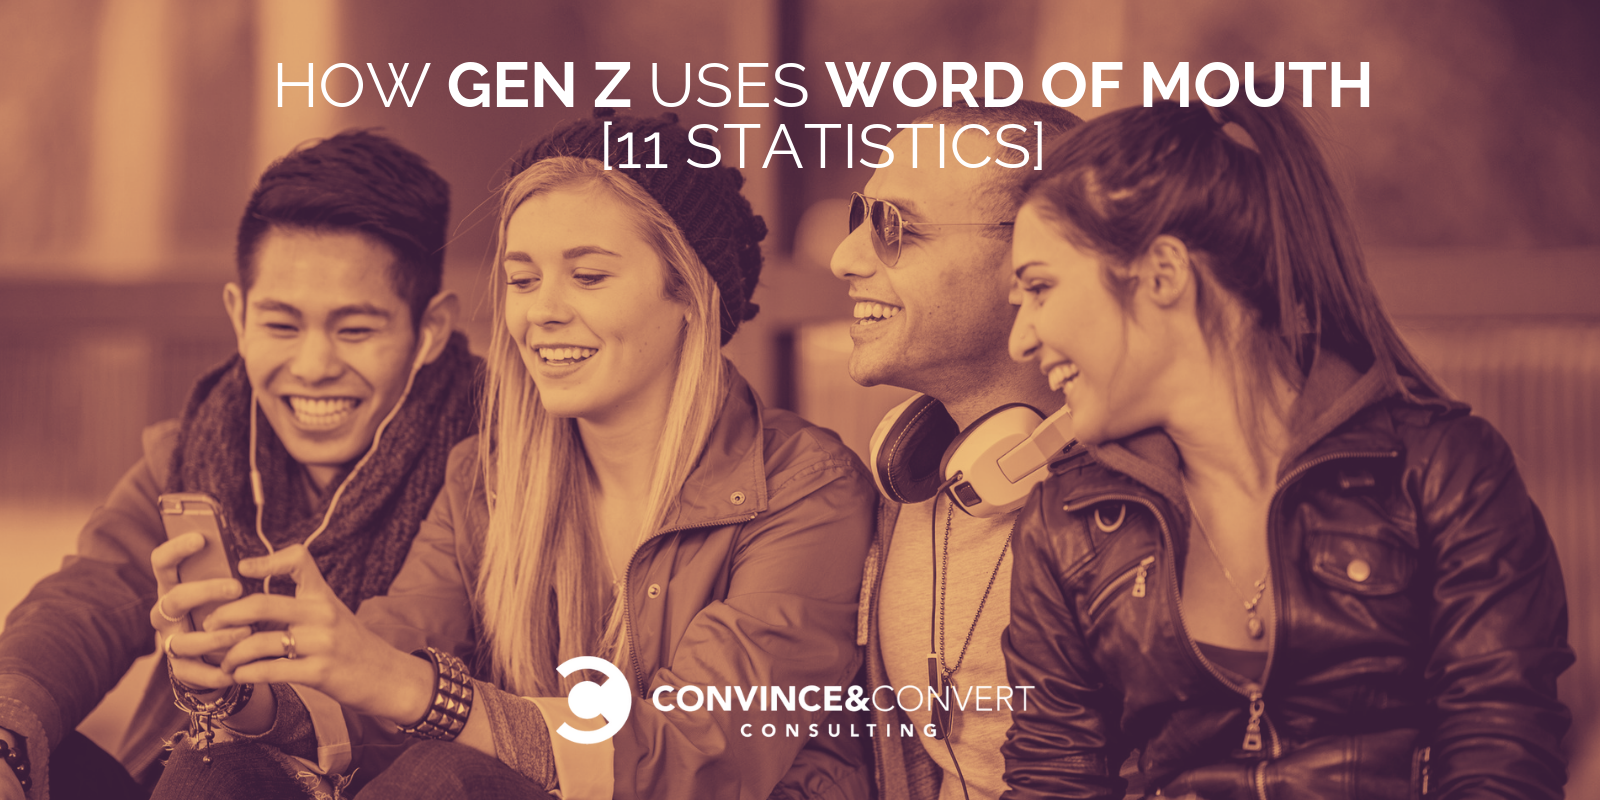 11 Gen Z Statistics on Word of Mouth